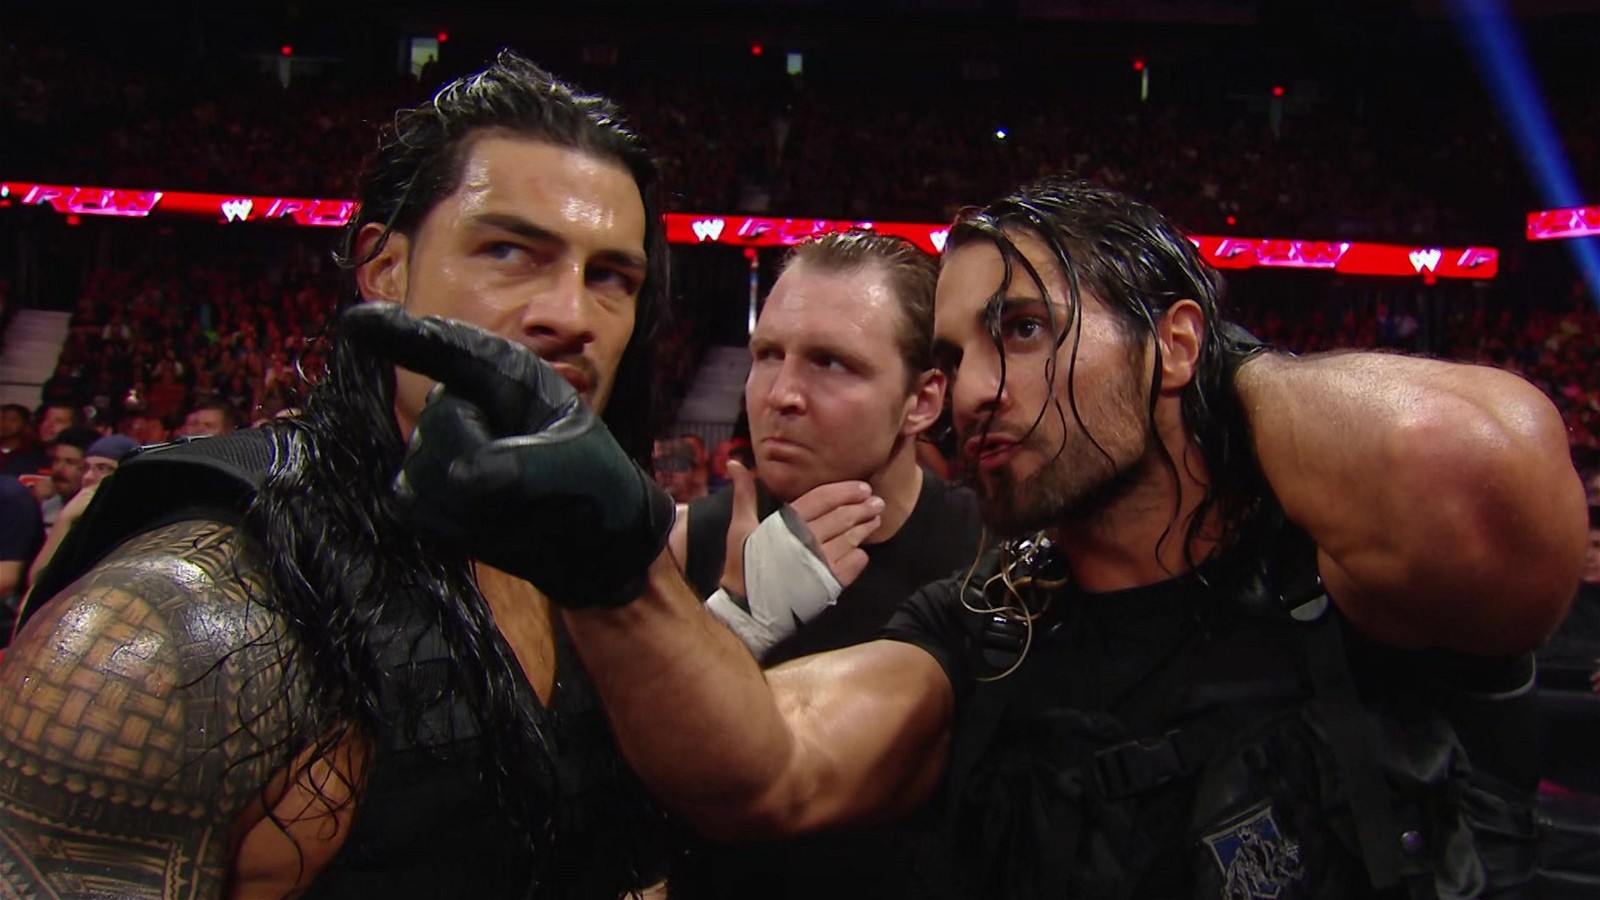 Roman Reigns and Seth Rollins were once part of The Shield